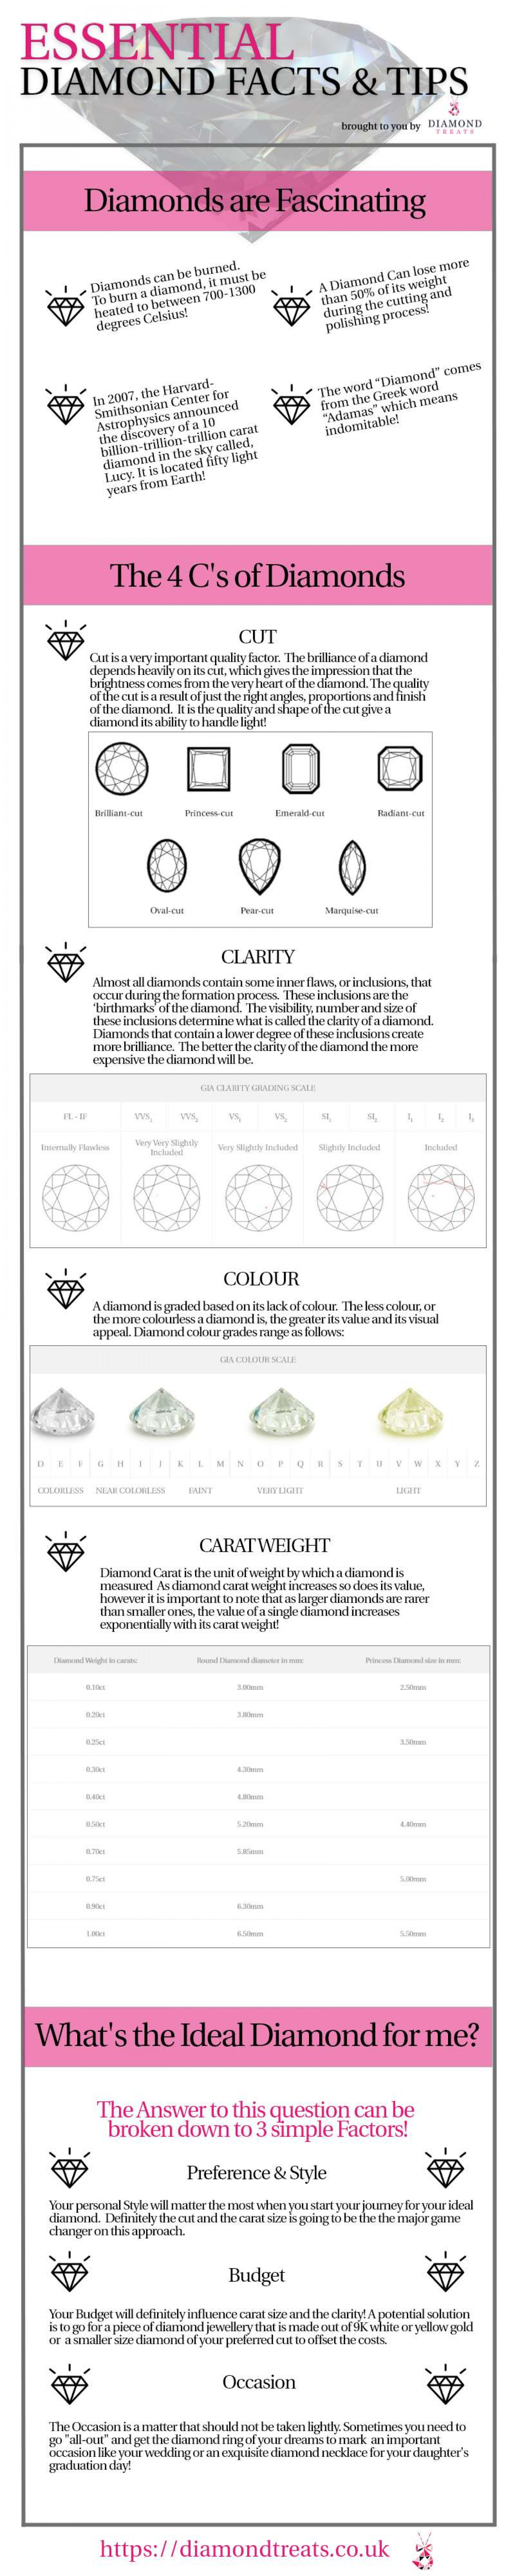 Essential Diamond Facts & Tips Infographic